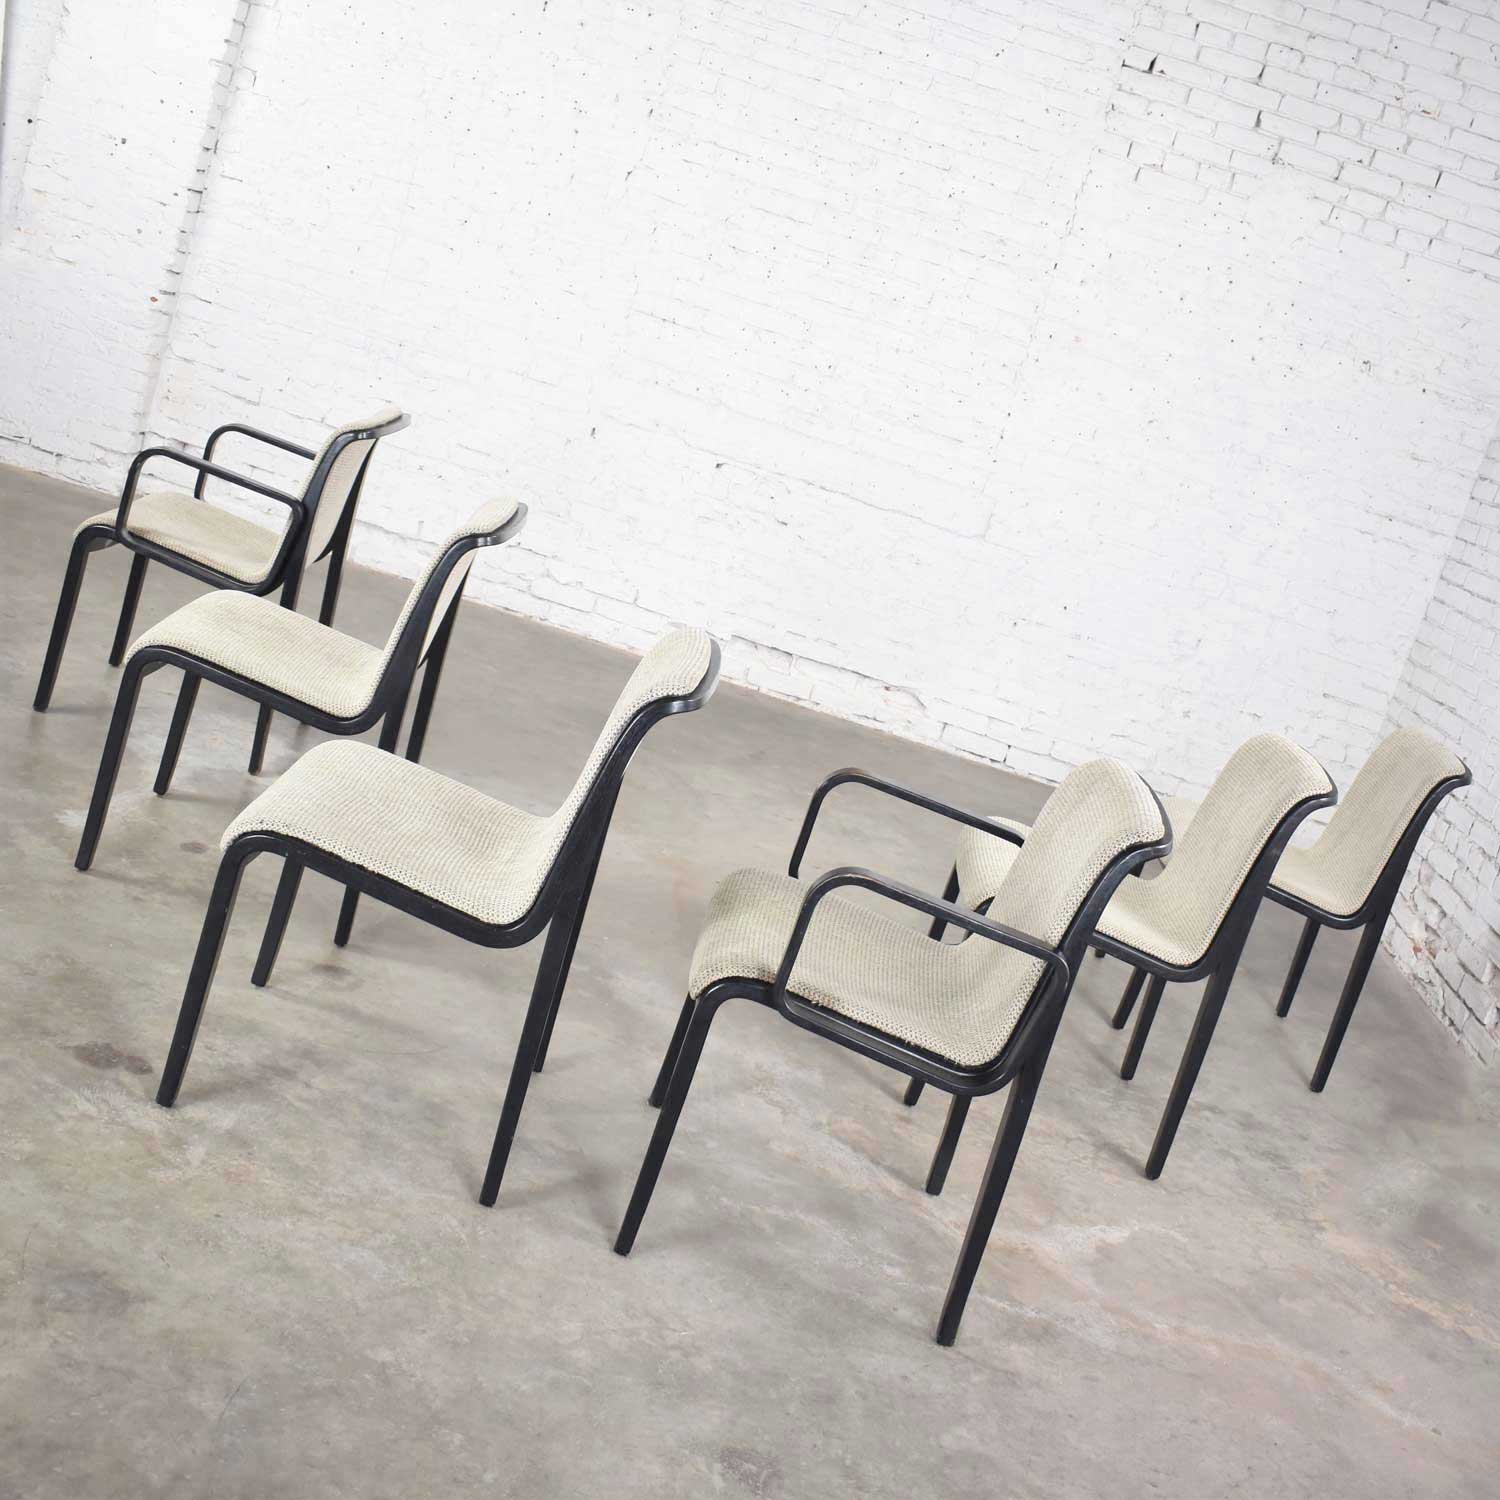 Vintage Mid-Century Modern Knoll 1300 Series Dining Chairs by Bill Stephens Set 6 Black